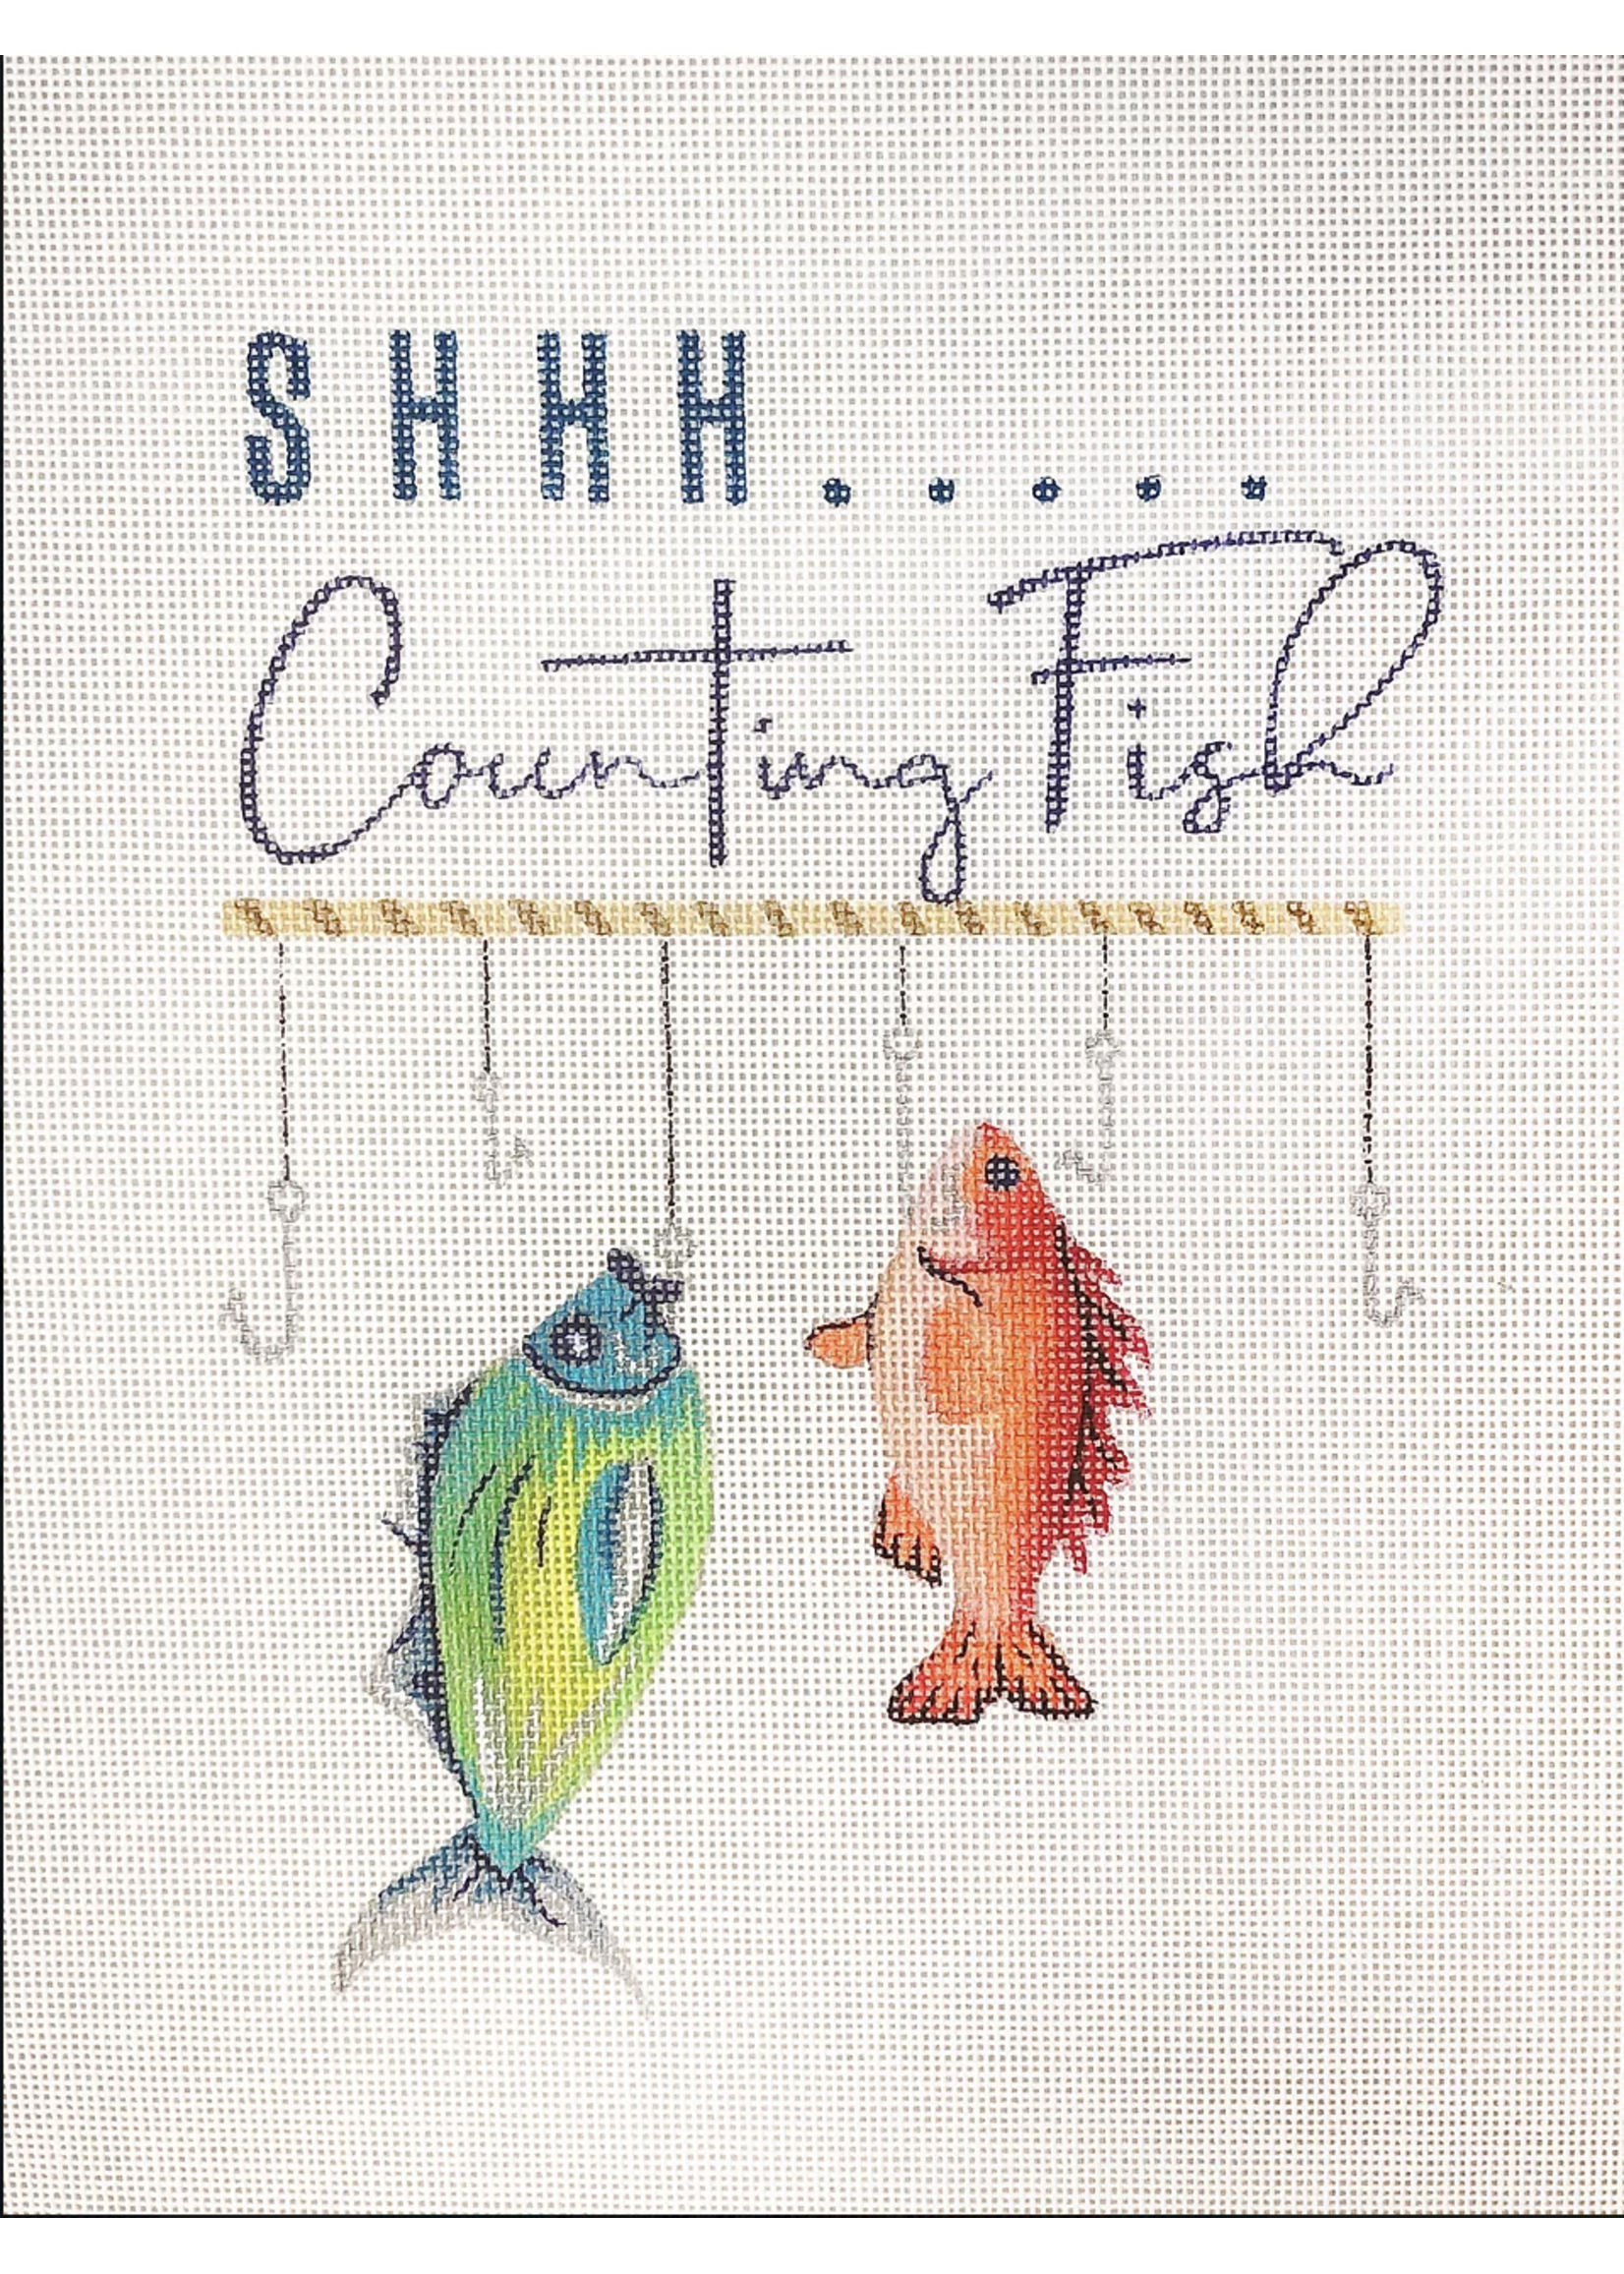 Y11 - Shhhh … Counting Fish